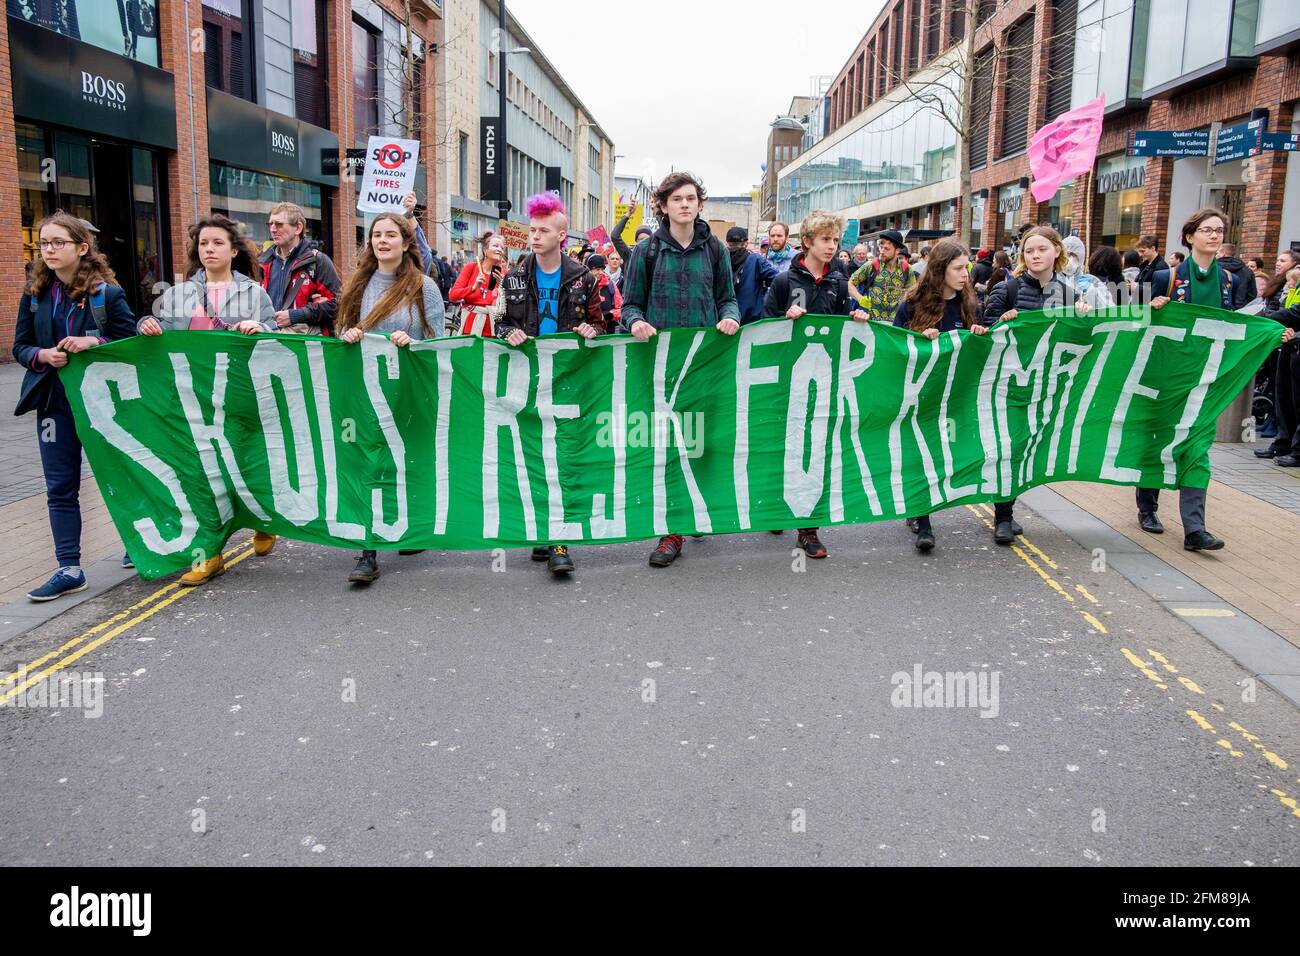 Bristol college student protesters and school children are pictured taking part in a Youth Strike 4 Climate change protest march in Bristol 14-02-20 Stock Photo